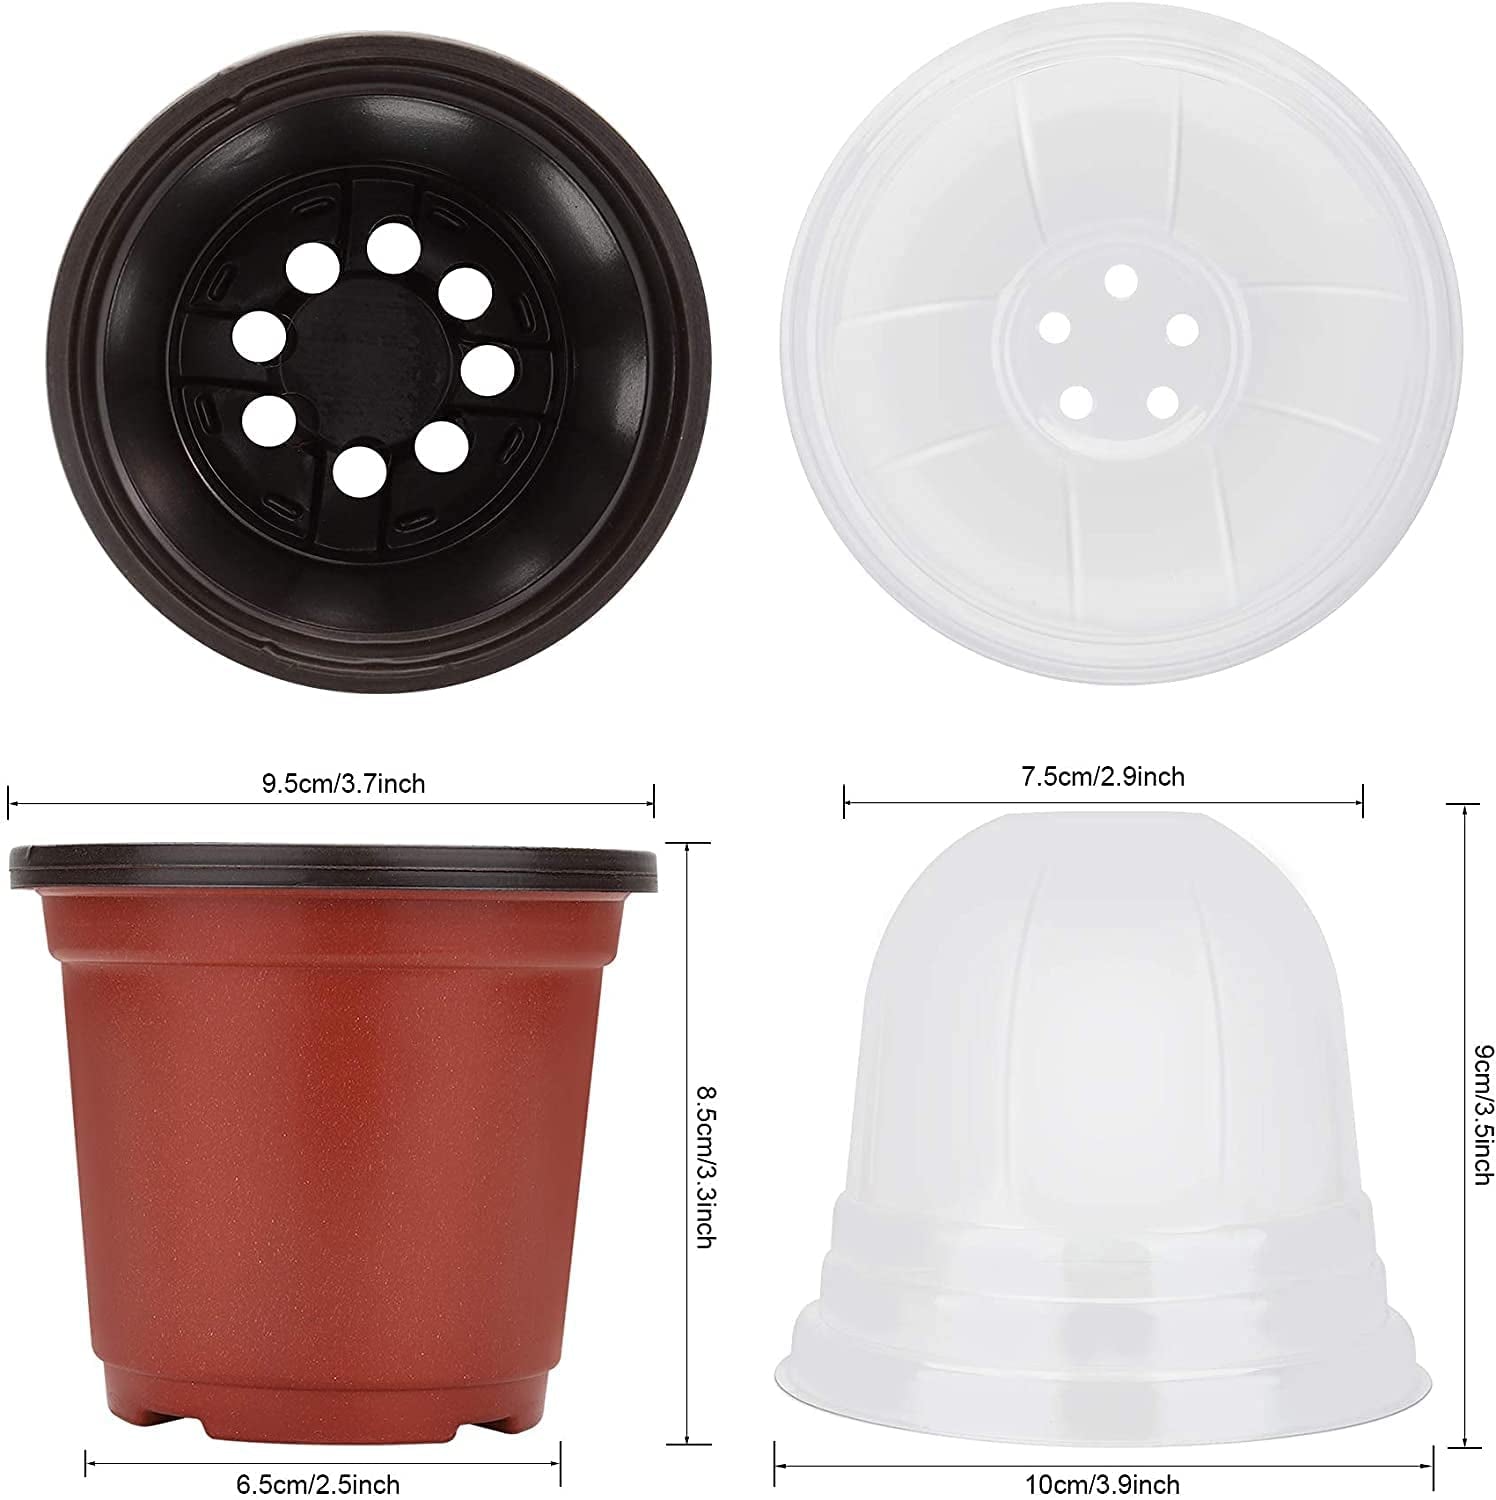 Plant Nursery Pots with Humidity Dome 4" Soft Transparent Plastic Gardening Pot Planting Containers Cups Planter Small Starter Seed Starting Trays for Seedling with 10Pcs Plant Labels，30 Sets